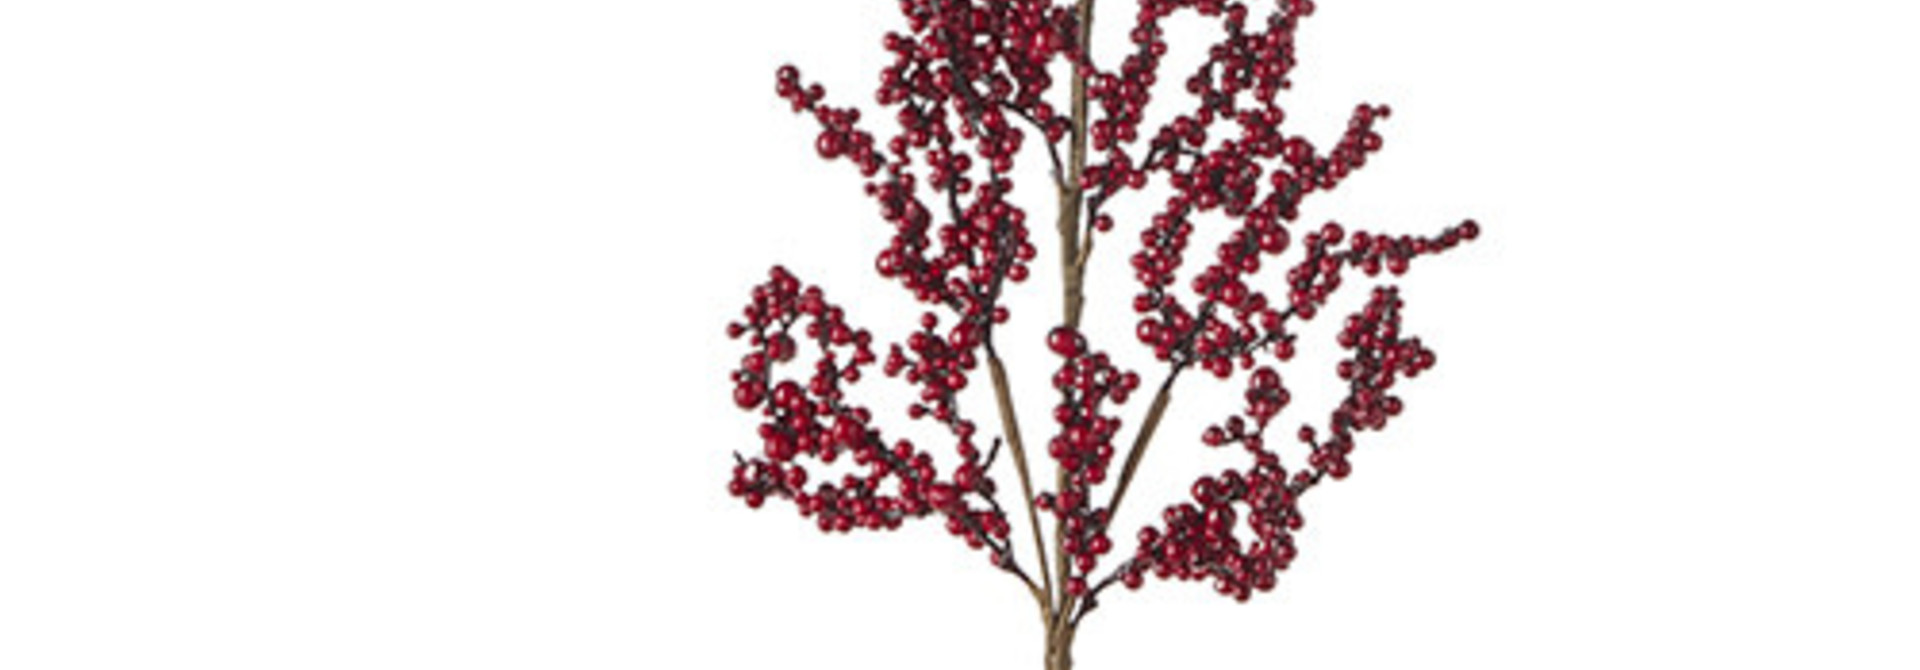 Winter Berries | The Holiday Floral Collection, Burgundy - 31 Inch